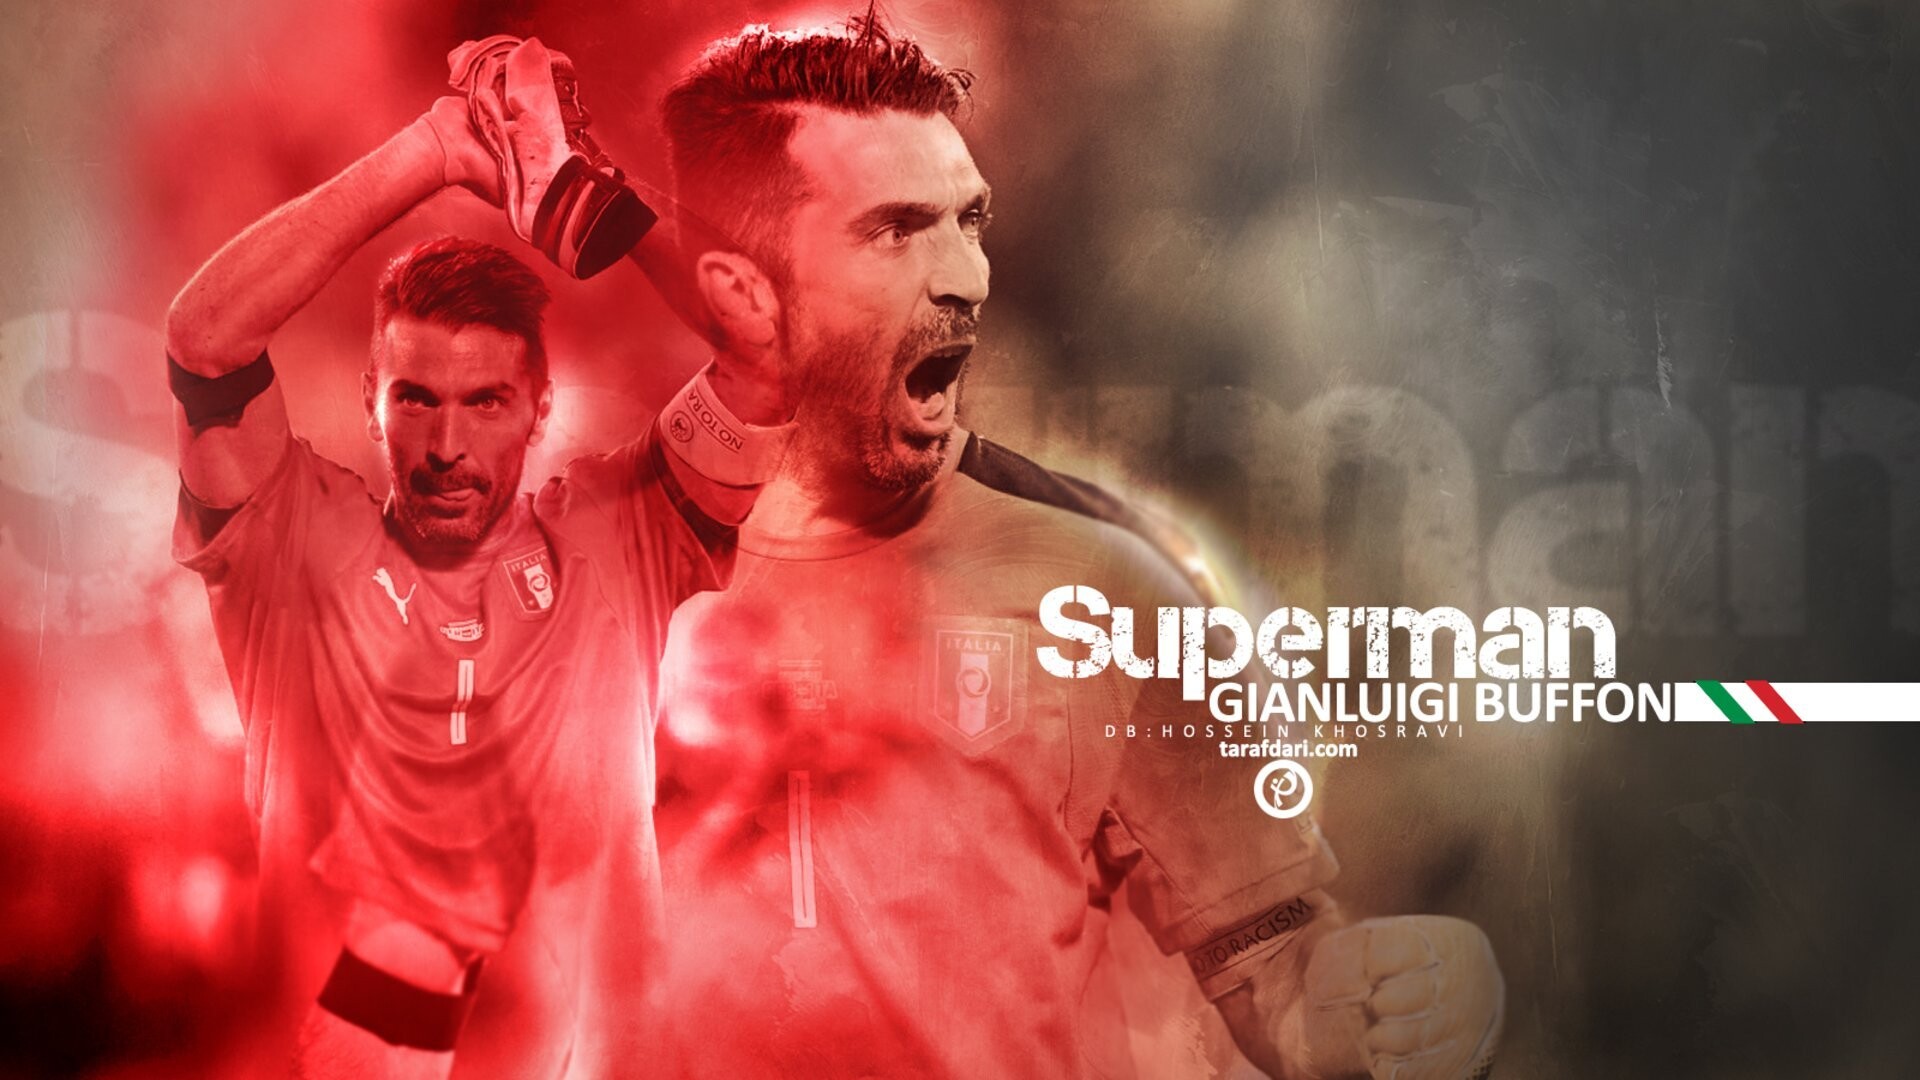 Gianluigi Buffon: The second-oldest goalkeeper to appear in the UEFA Champions League, Superman. 1920x1080 Full HD Background.